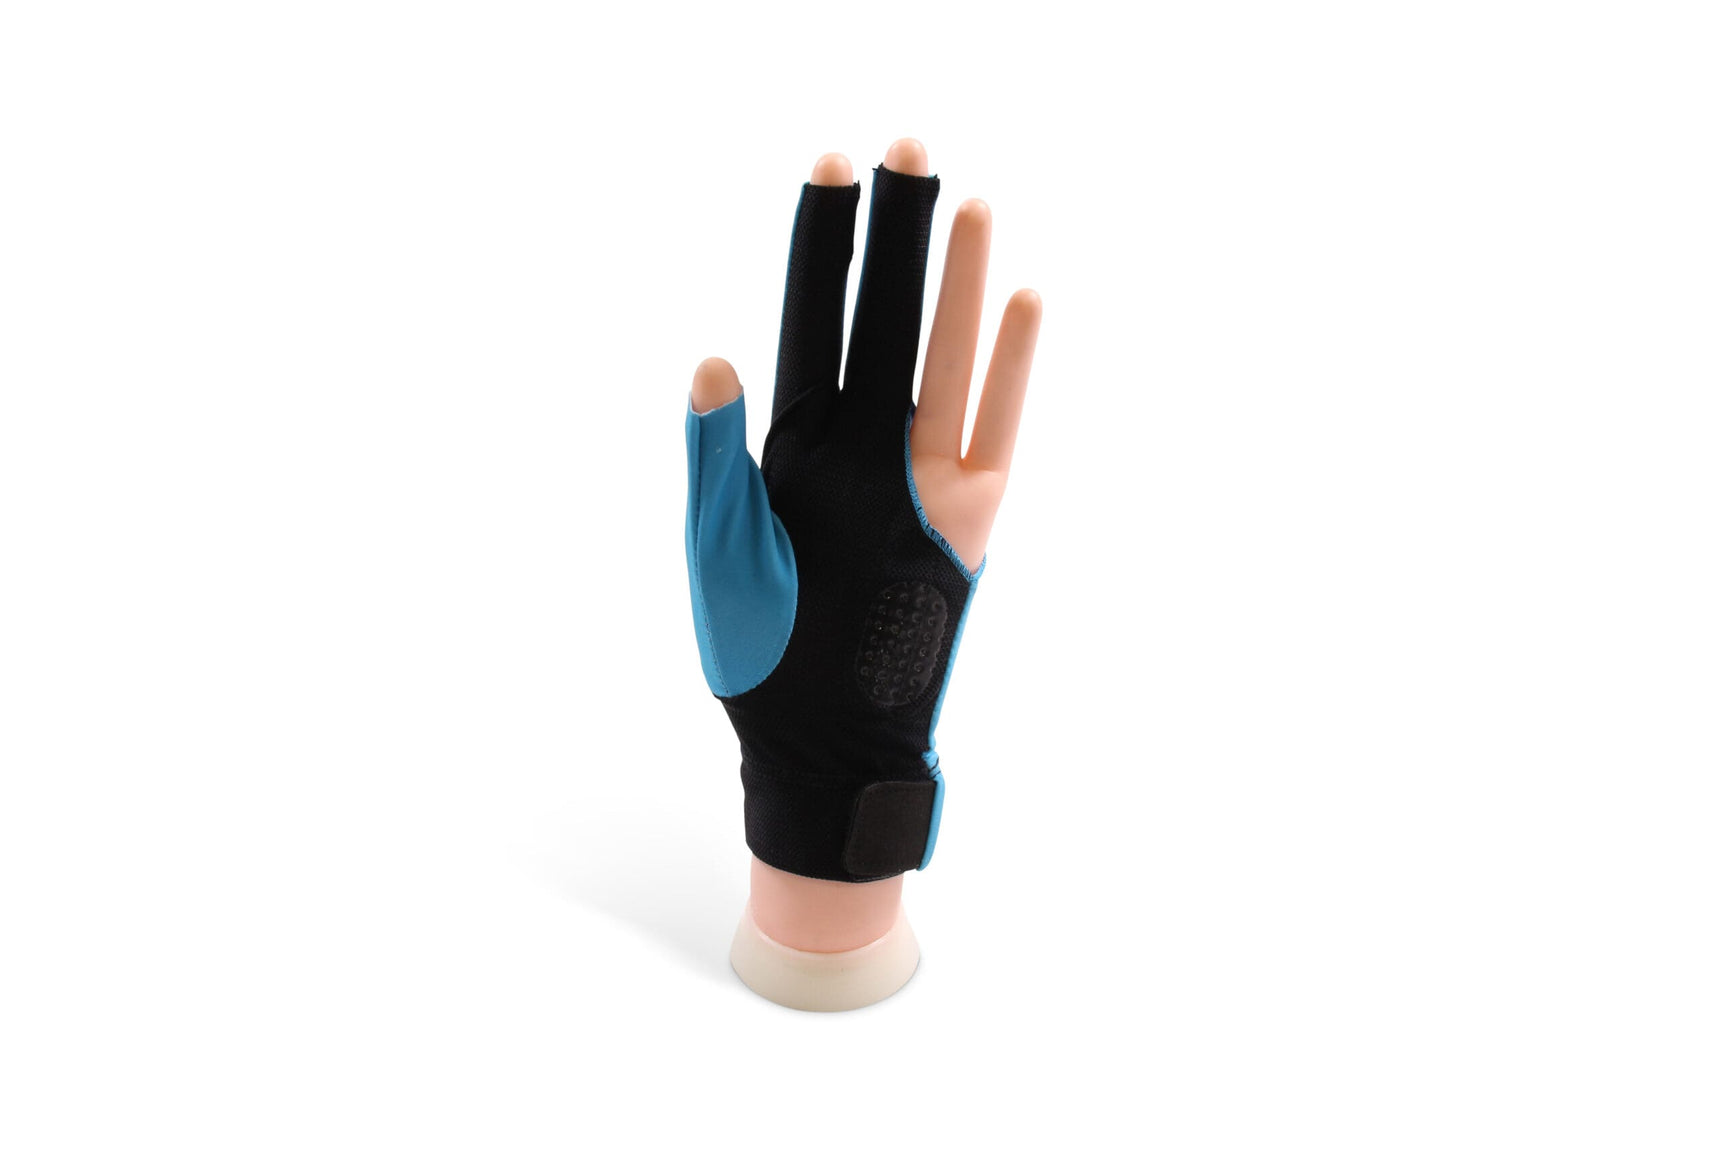 BAIZE MASTER Professional Three-Finger Snooker Pool Cueing Glove - For a Smoother Cue Action - Left Hand